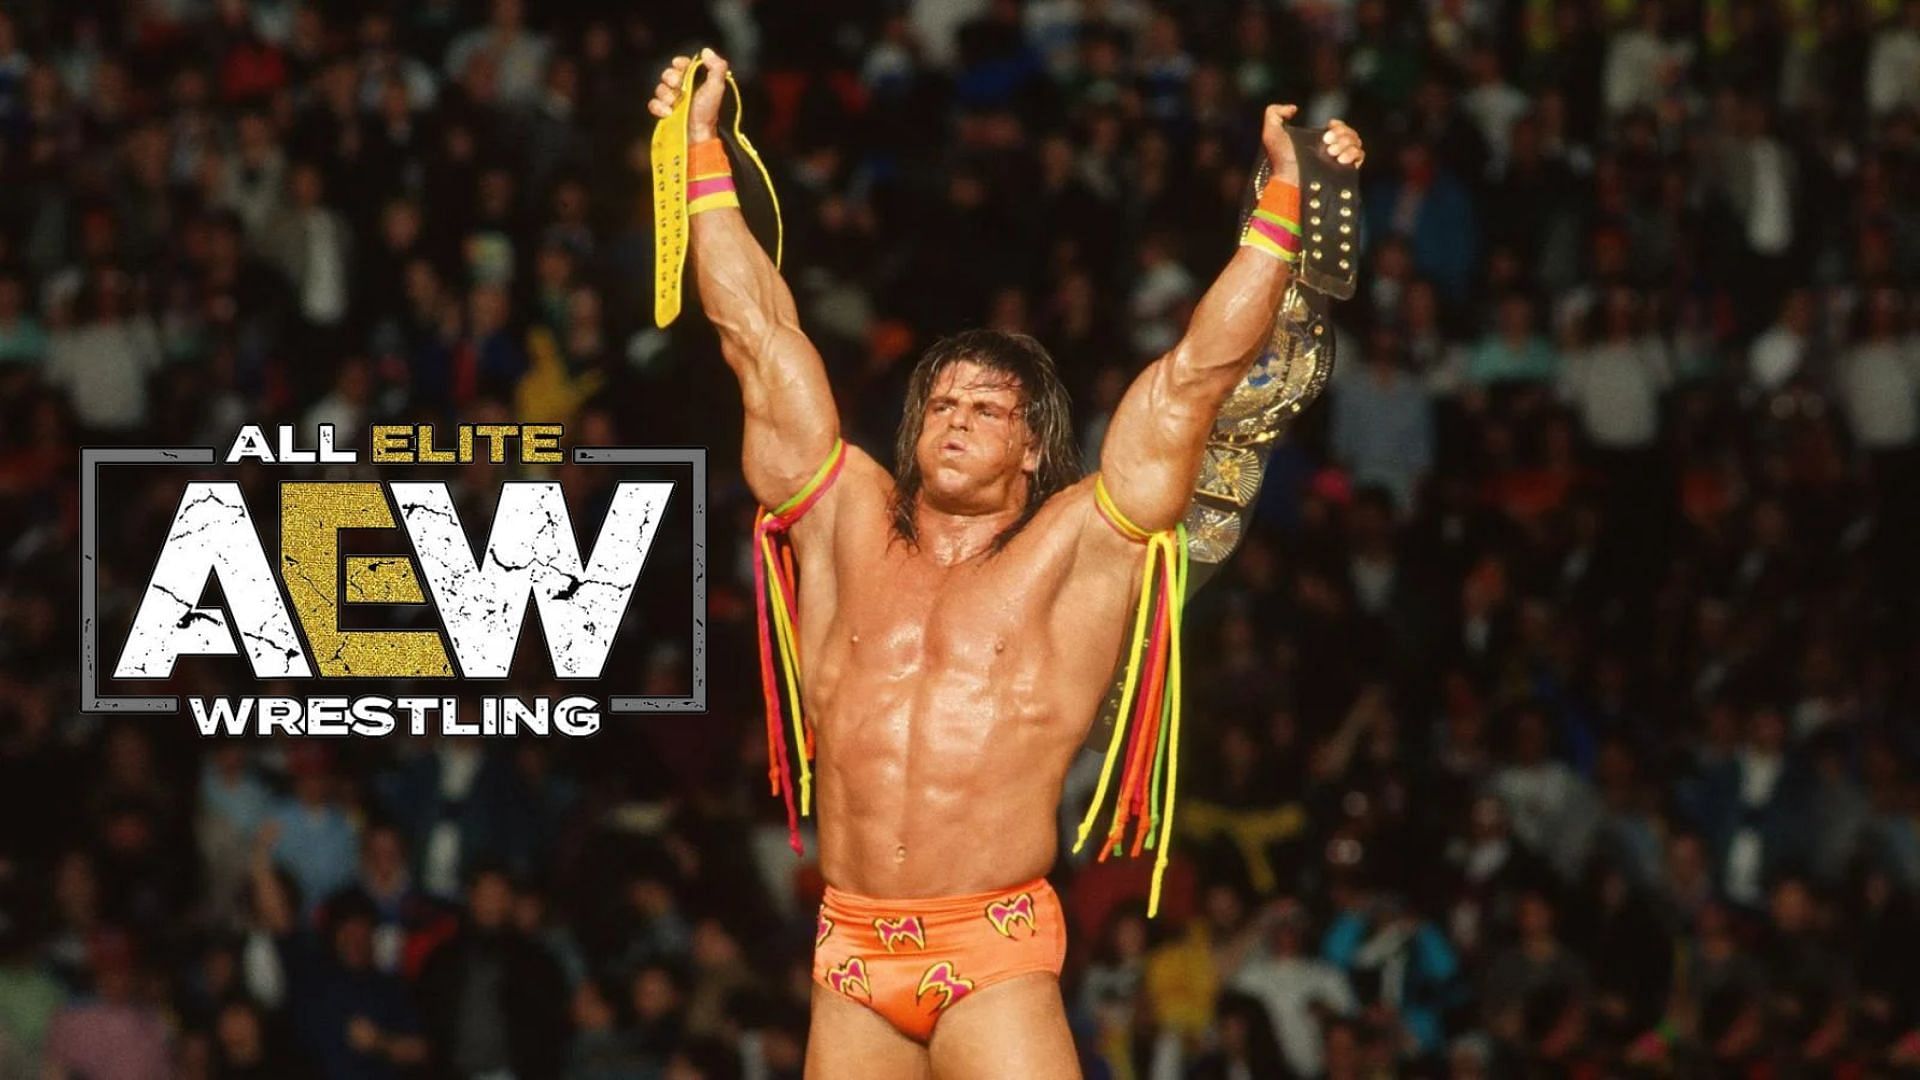 The Ultimate Warrior was this AEW star